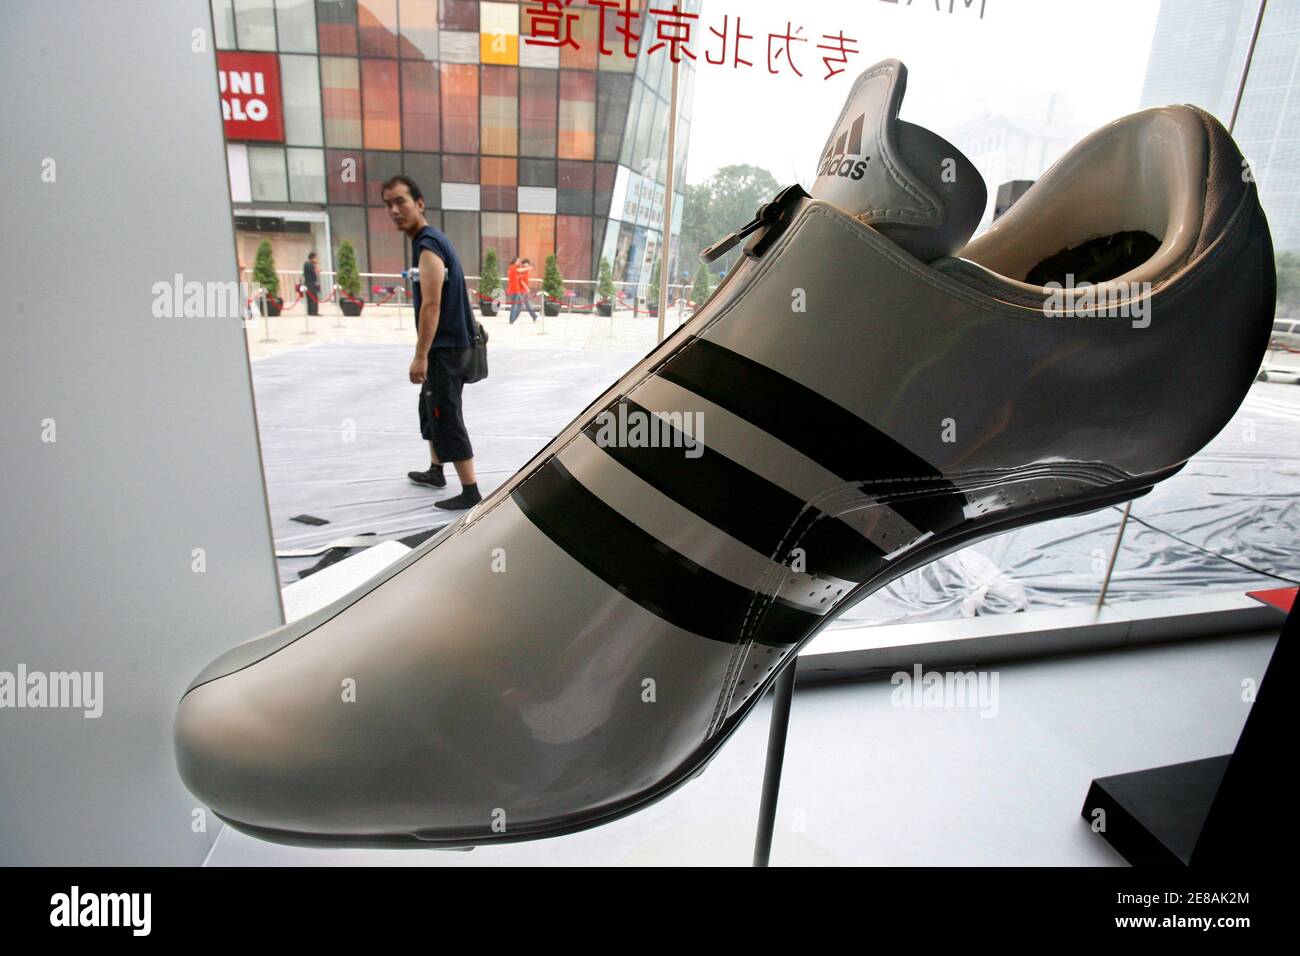 Adidas store display High Resolution Stock Photography and Images - Alamy